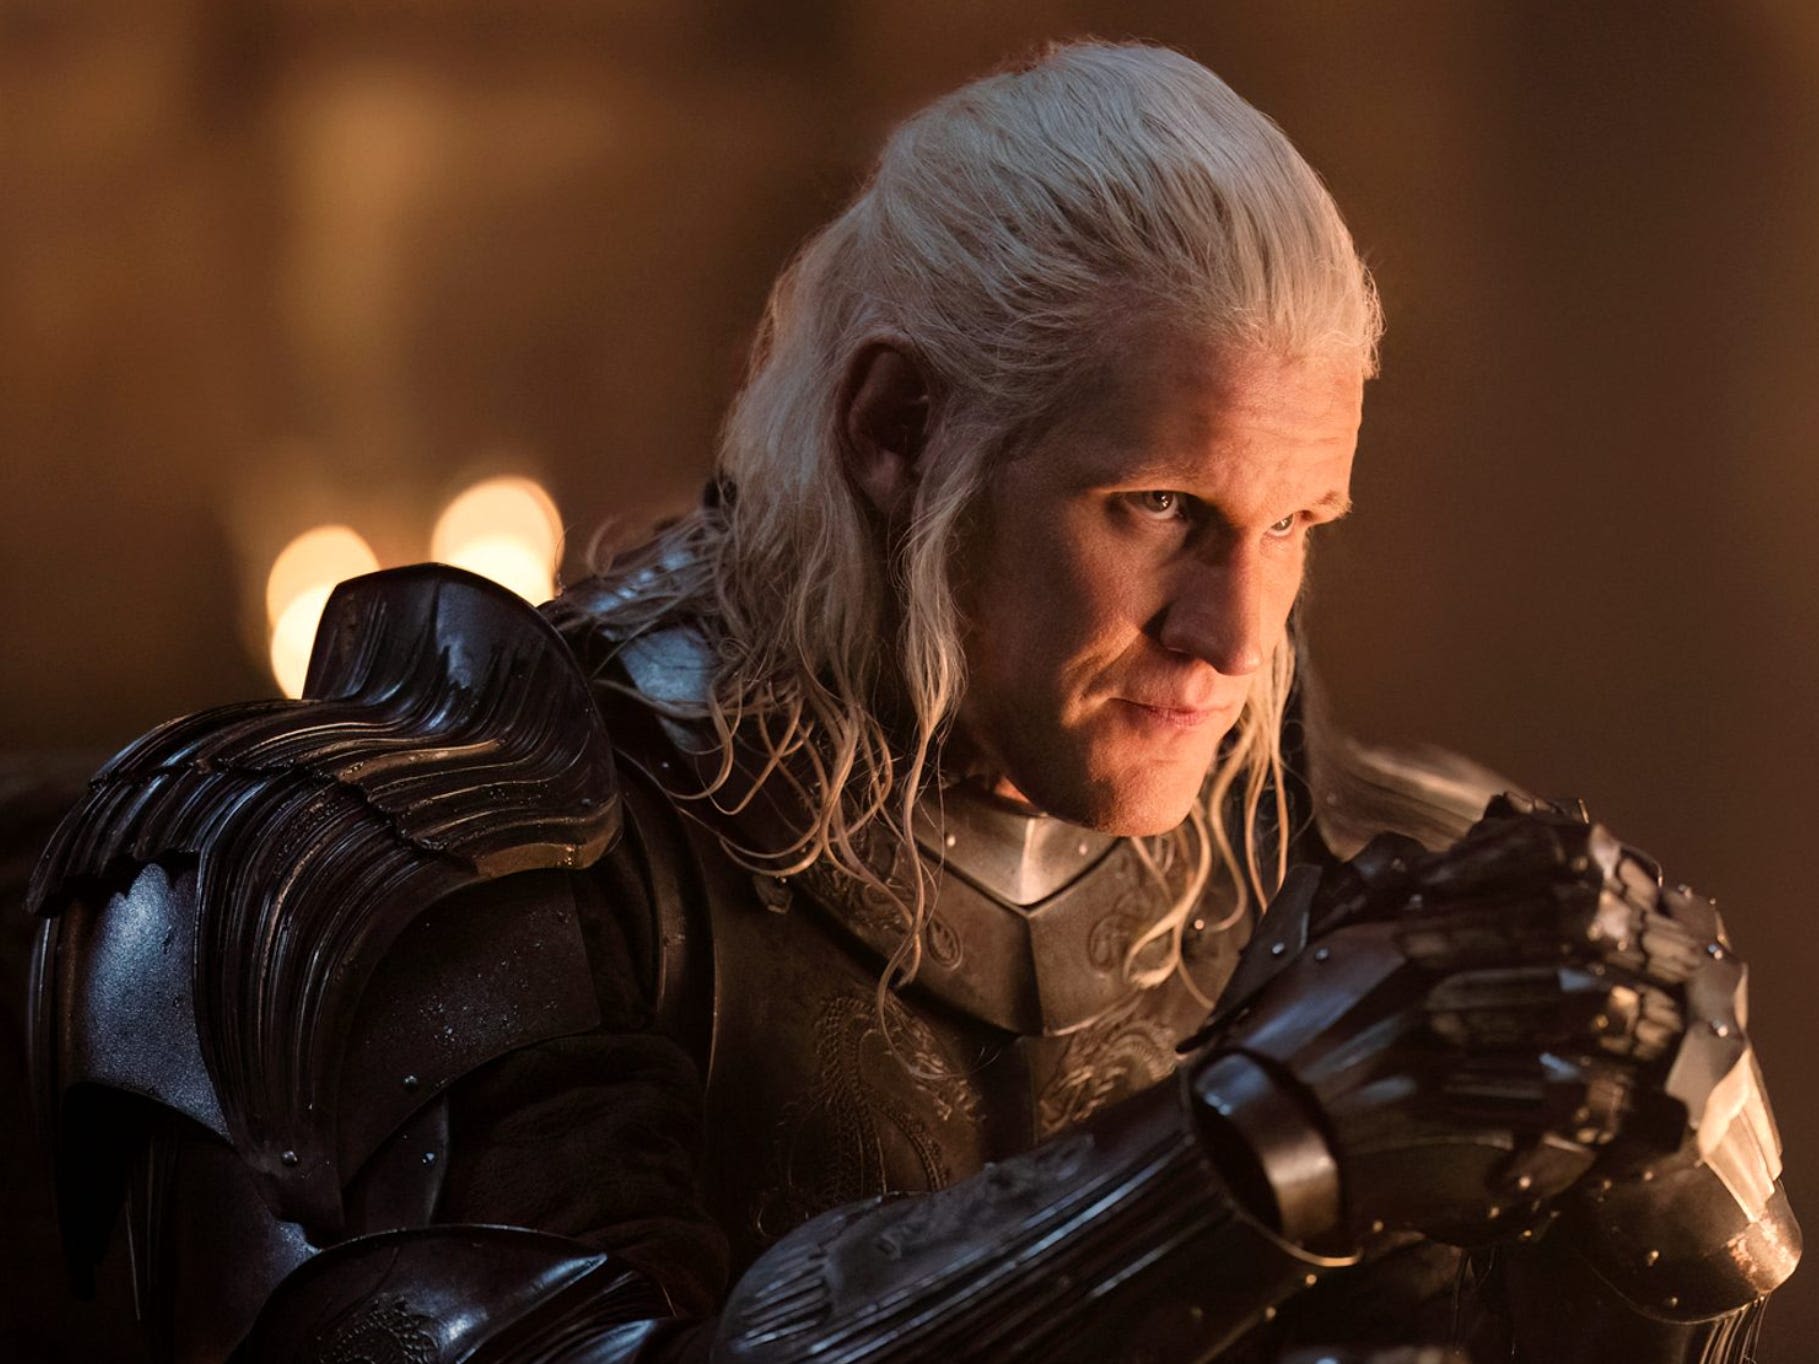 The 'House of the Dragon' season 2 finale introduces a mysterious new character. Here's who Brynden Rivers AKA Lord Bloodraven is and what happens to him in the books.